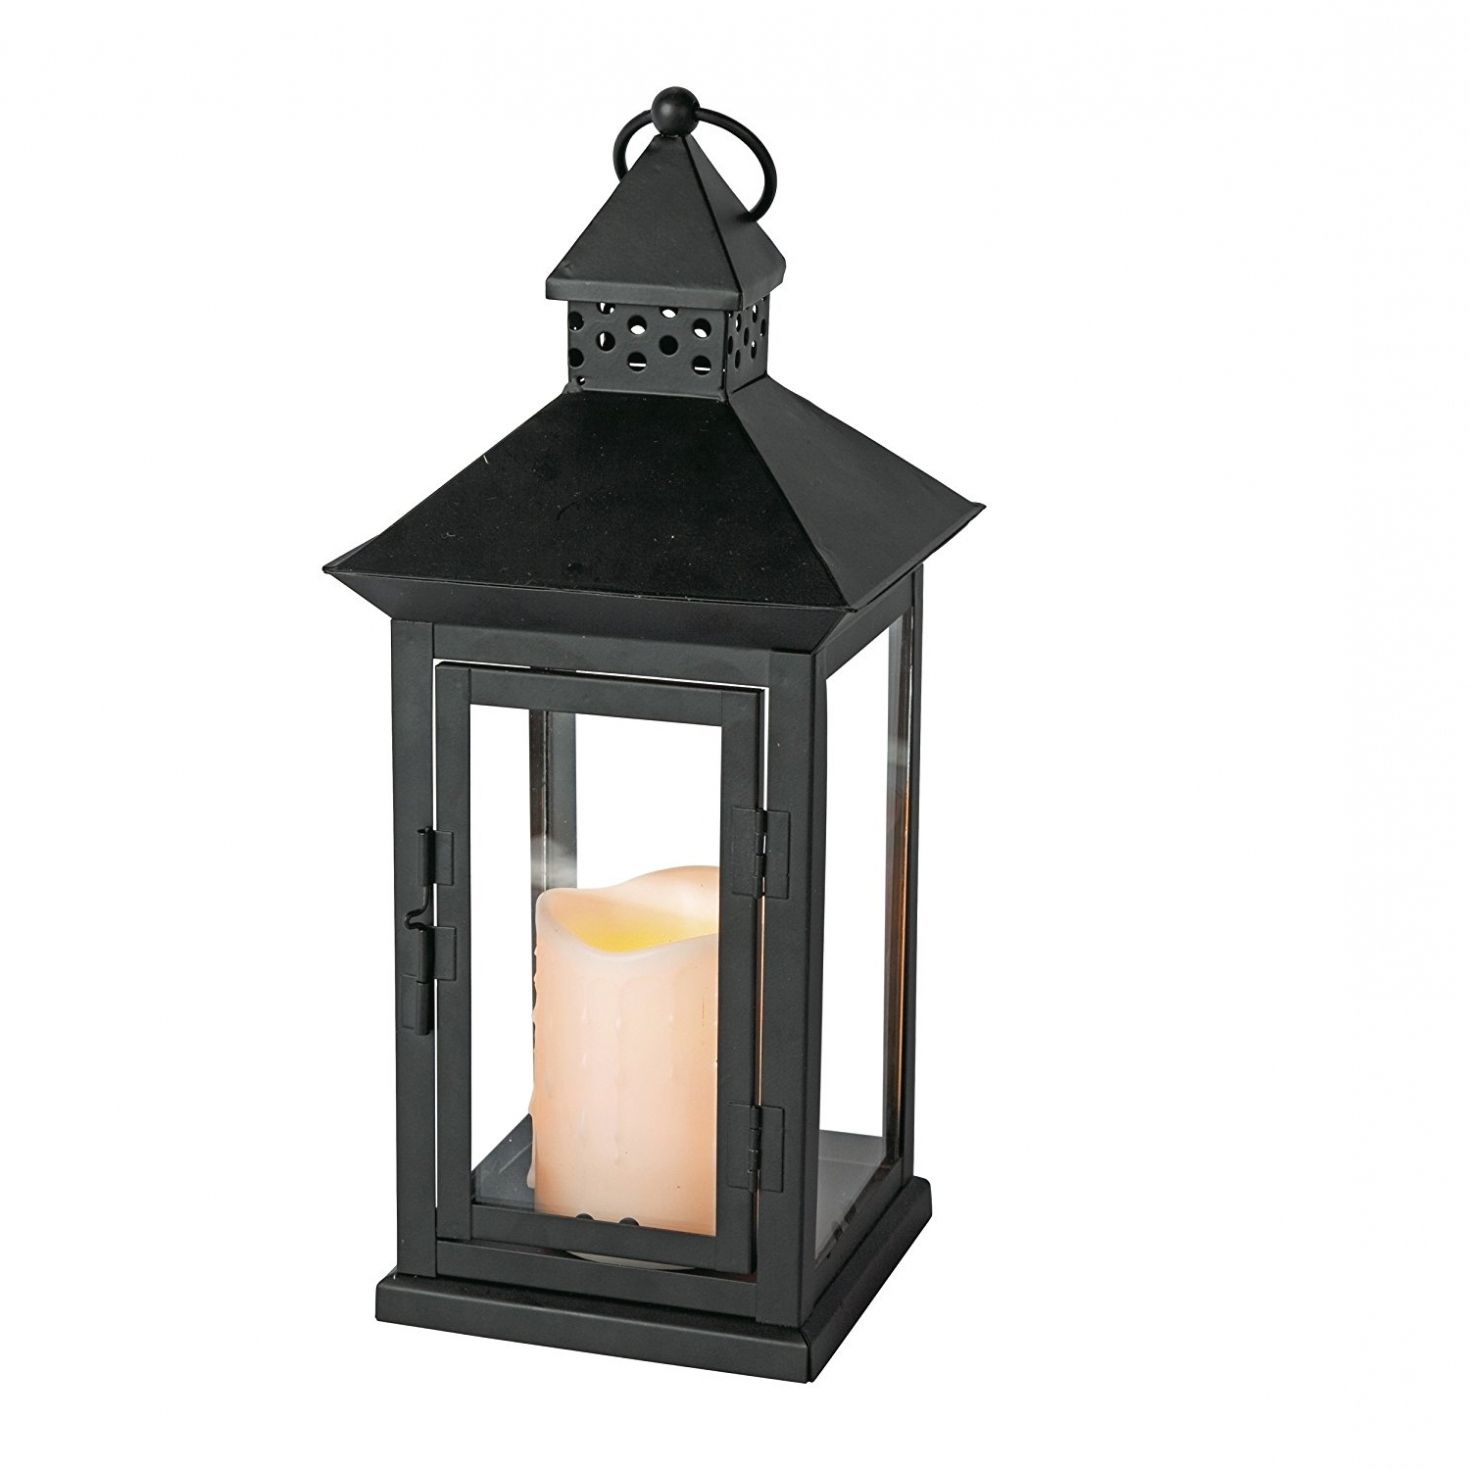 Favorite Outdoor Lanterns At Amazon Intended For Interior Decor: Amazon: Everlasting Glow Indoor/outdoor 6" X  (View 1 of 20)